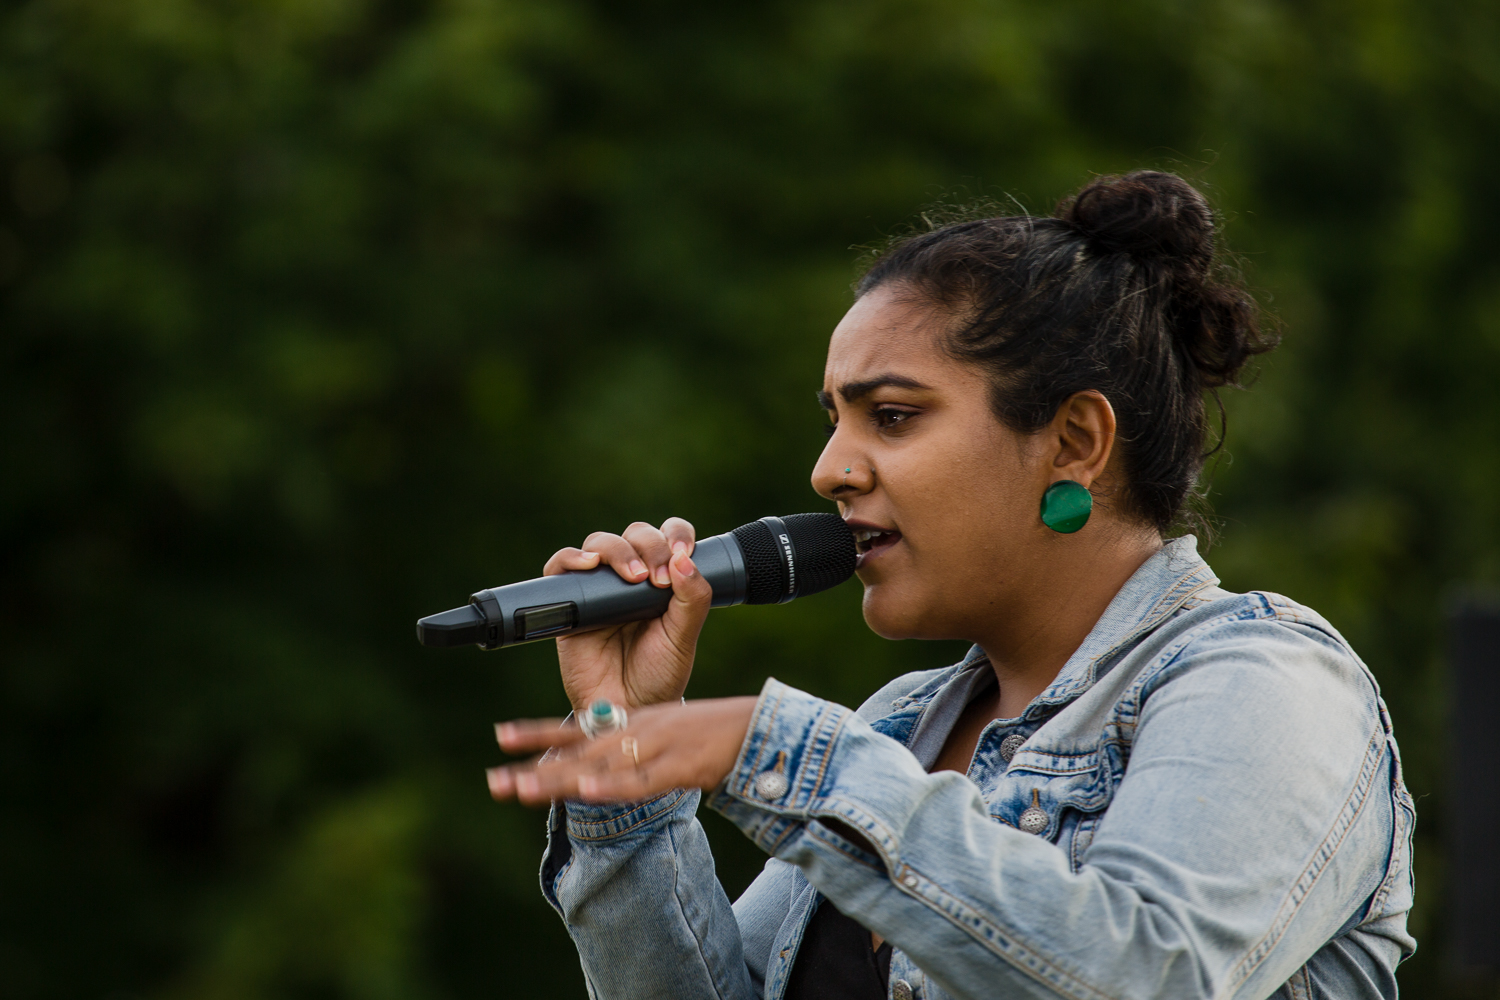 A woman in a jean jacket sings into a microphone.